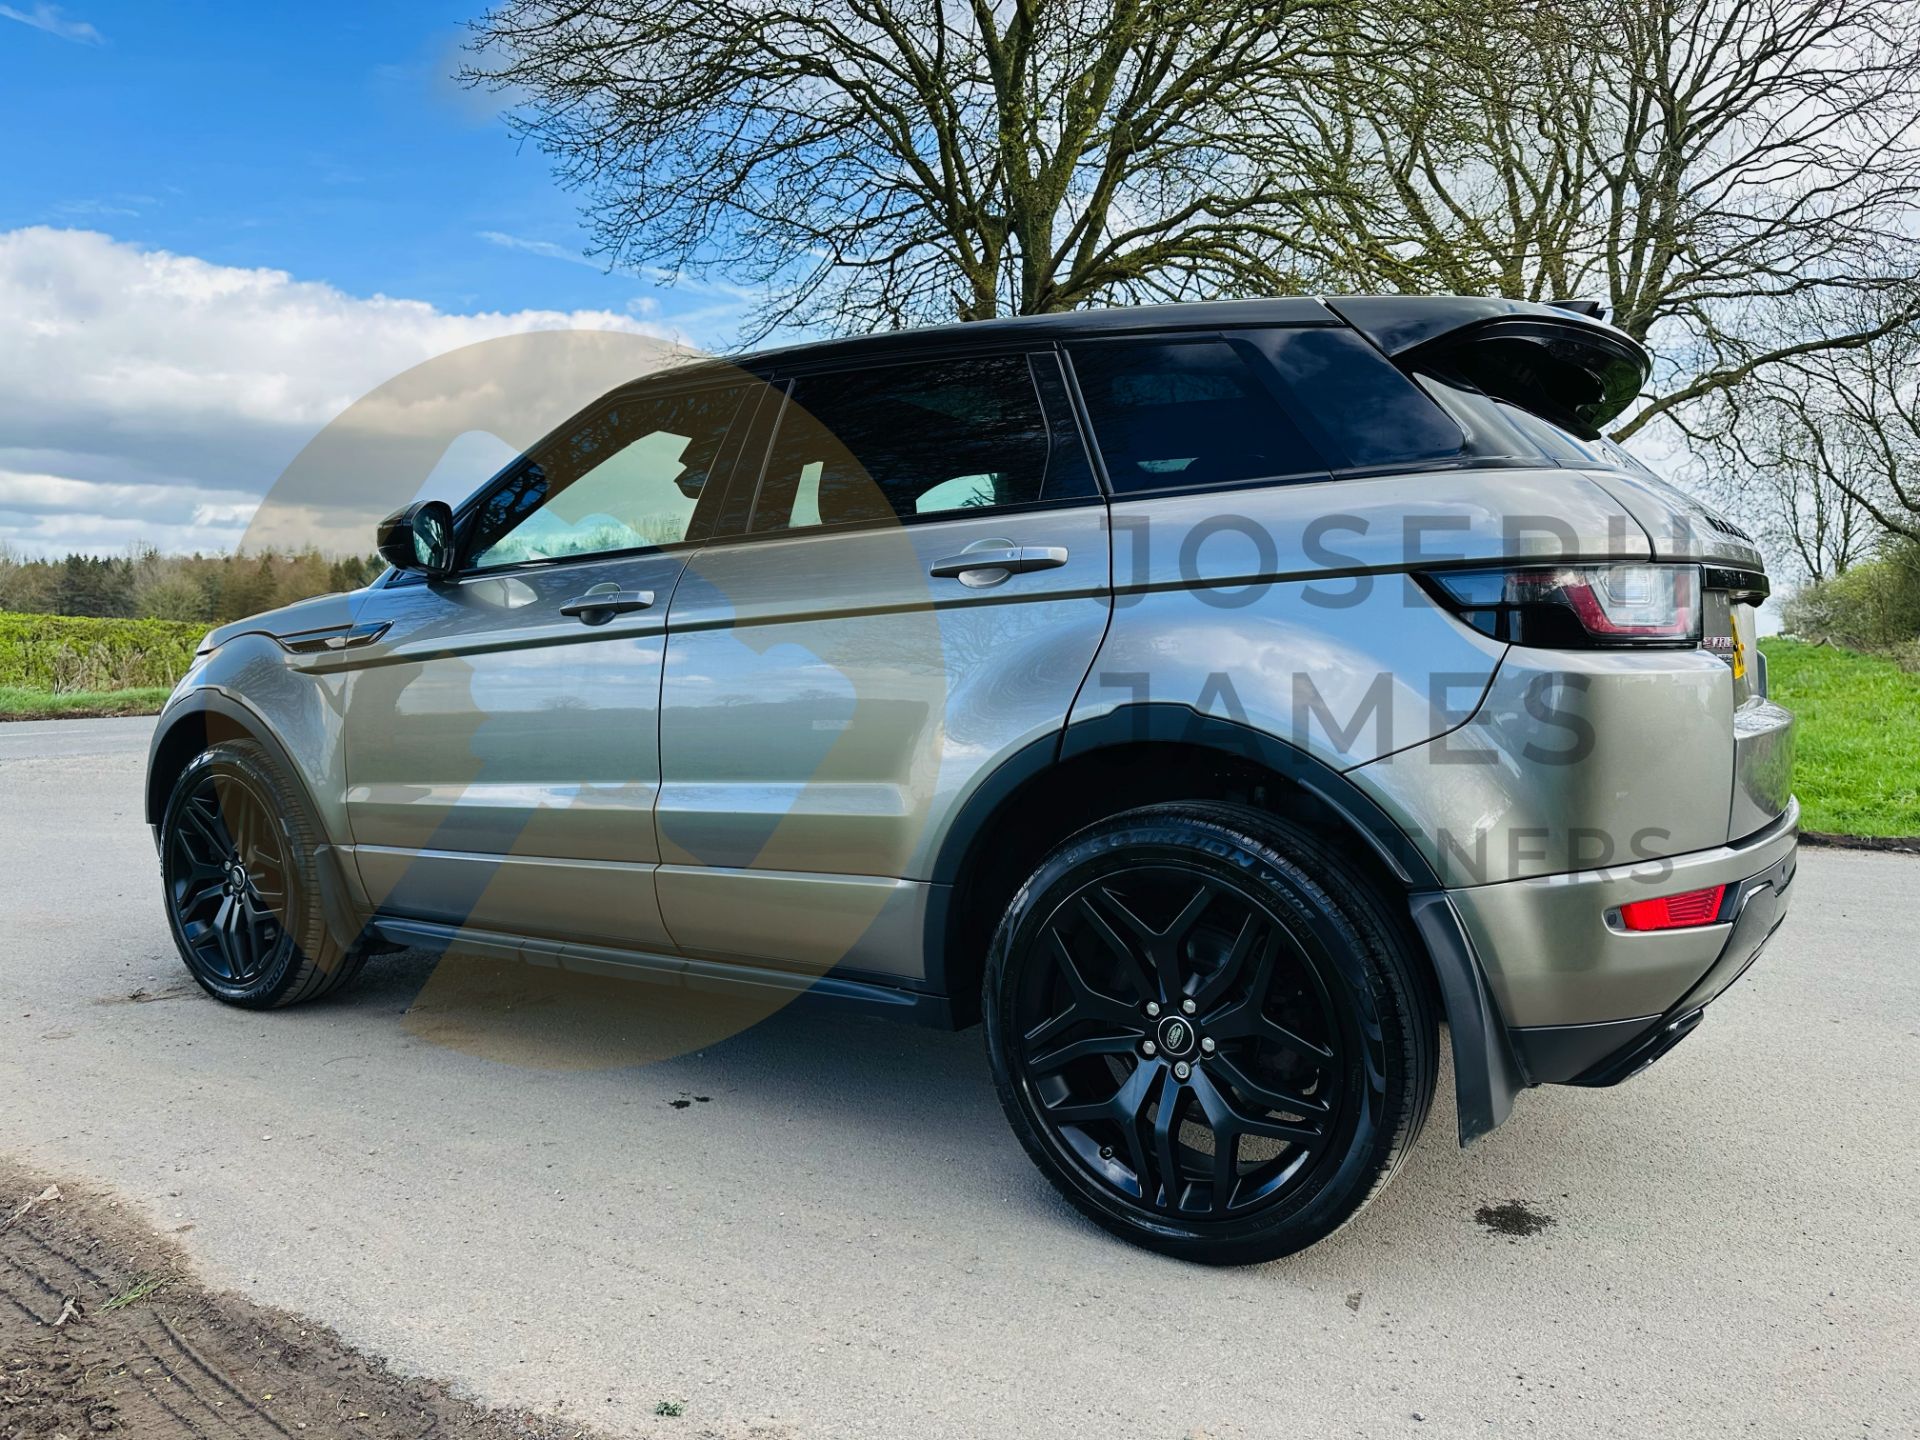 (On Sale) RANGE ROVER EVOQUE *HSE DYNAMIC* SUV (2018 - EURO 6) 2.0 SD4 - AUTOMATIC *ULTIMATE SPEC* - Image 8 of 48